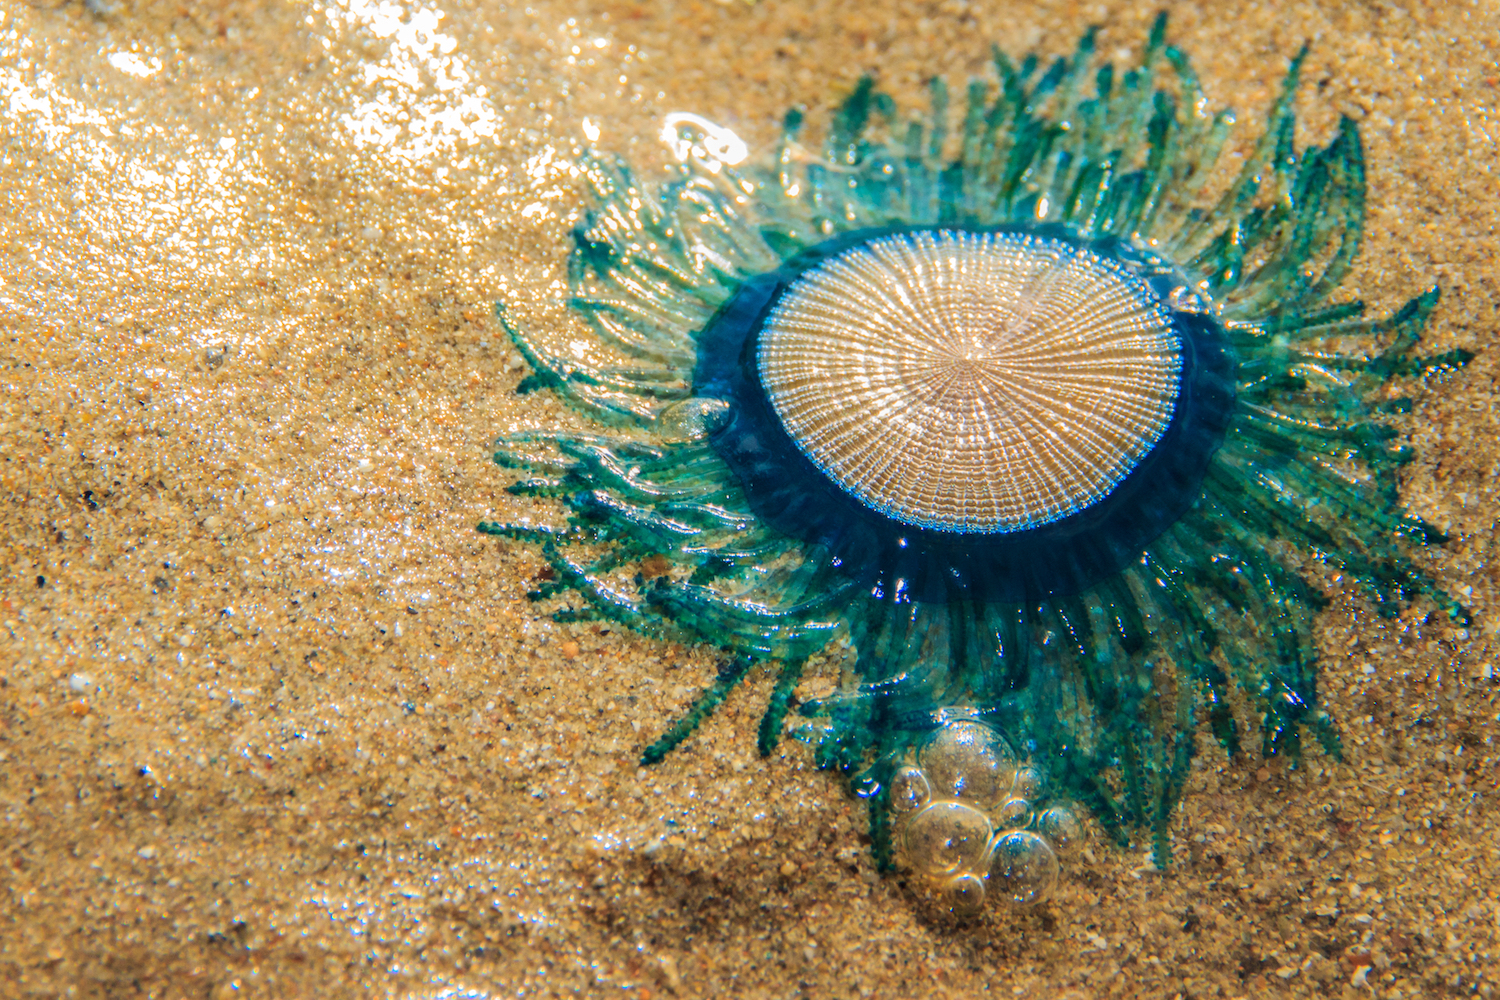 Rare, Blue Jellyfish-Like Creatures Wash Ashore in NJ, Puzzling Beachgoers  | Live Science